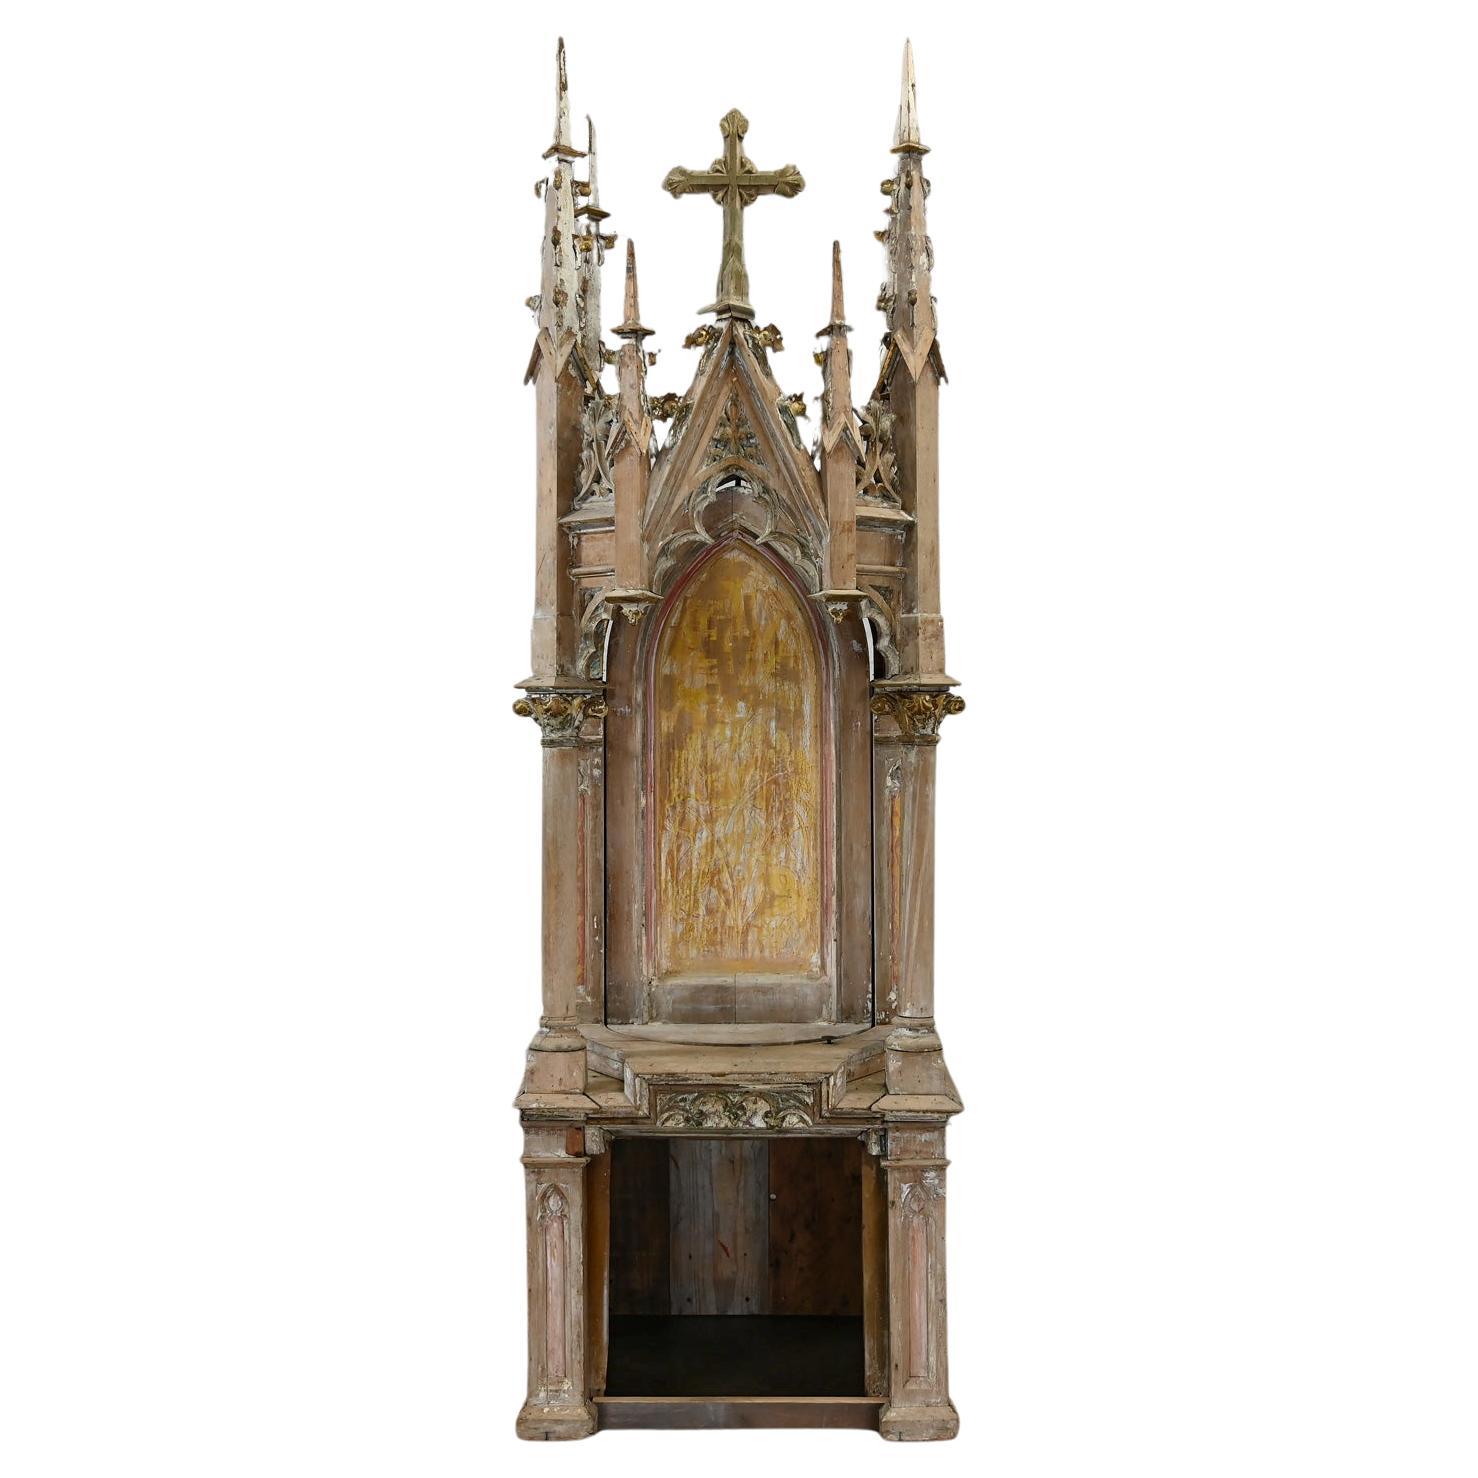 Gothic Architectural Church Spire or Steeple Pivoting Shrine Distressed Finish 